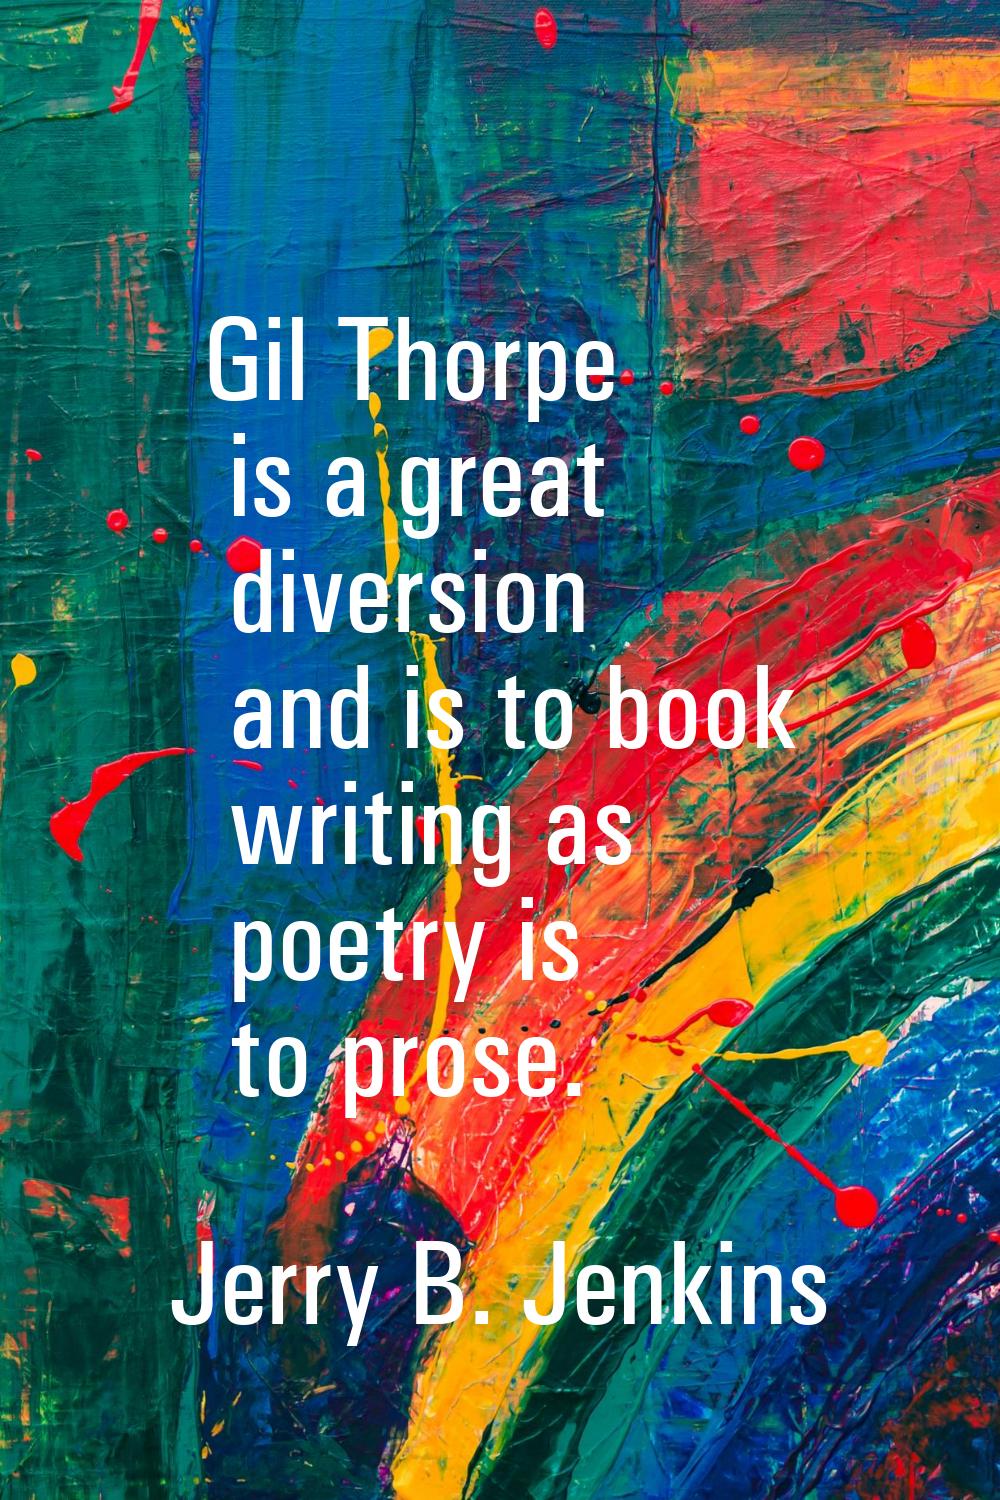 Gil Thorpe is a great diversion and is to book writing as poetry is to prose.